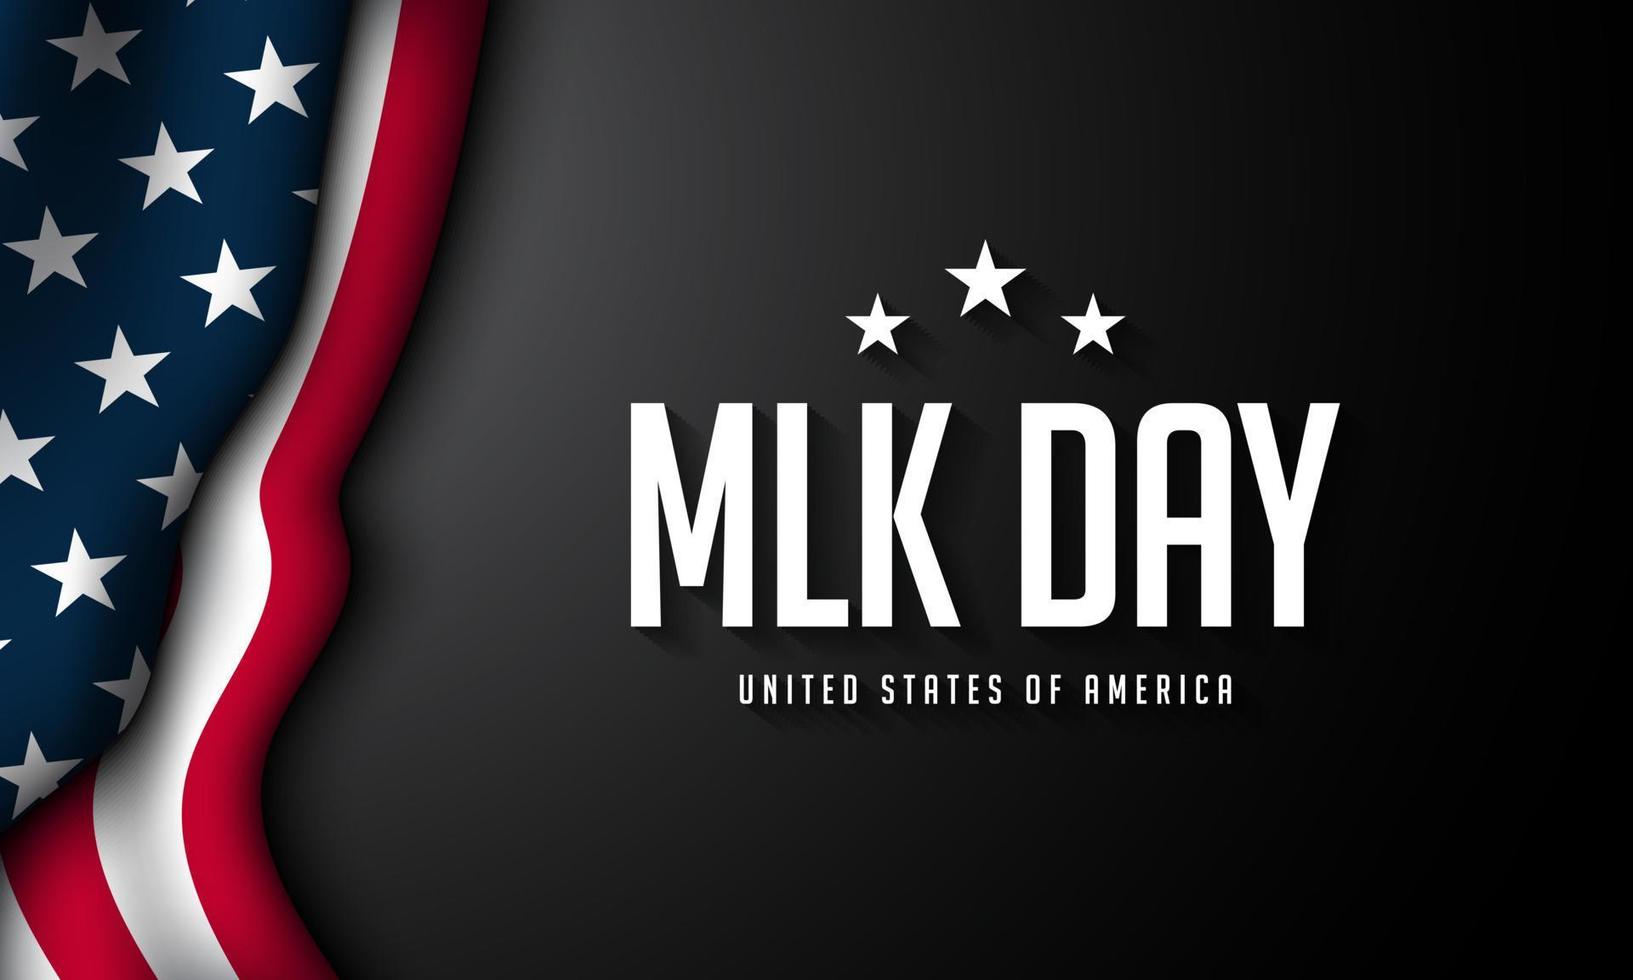 United States of America MLK Day Background Design. vector